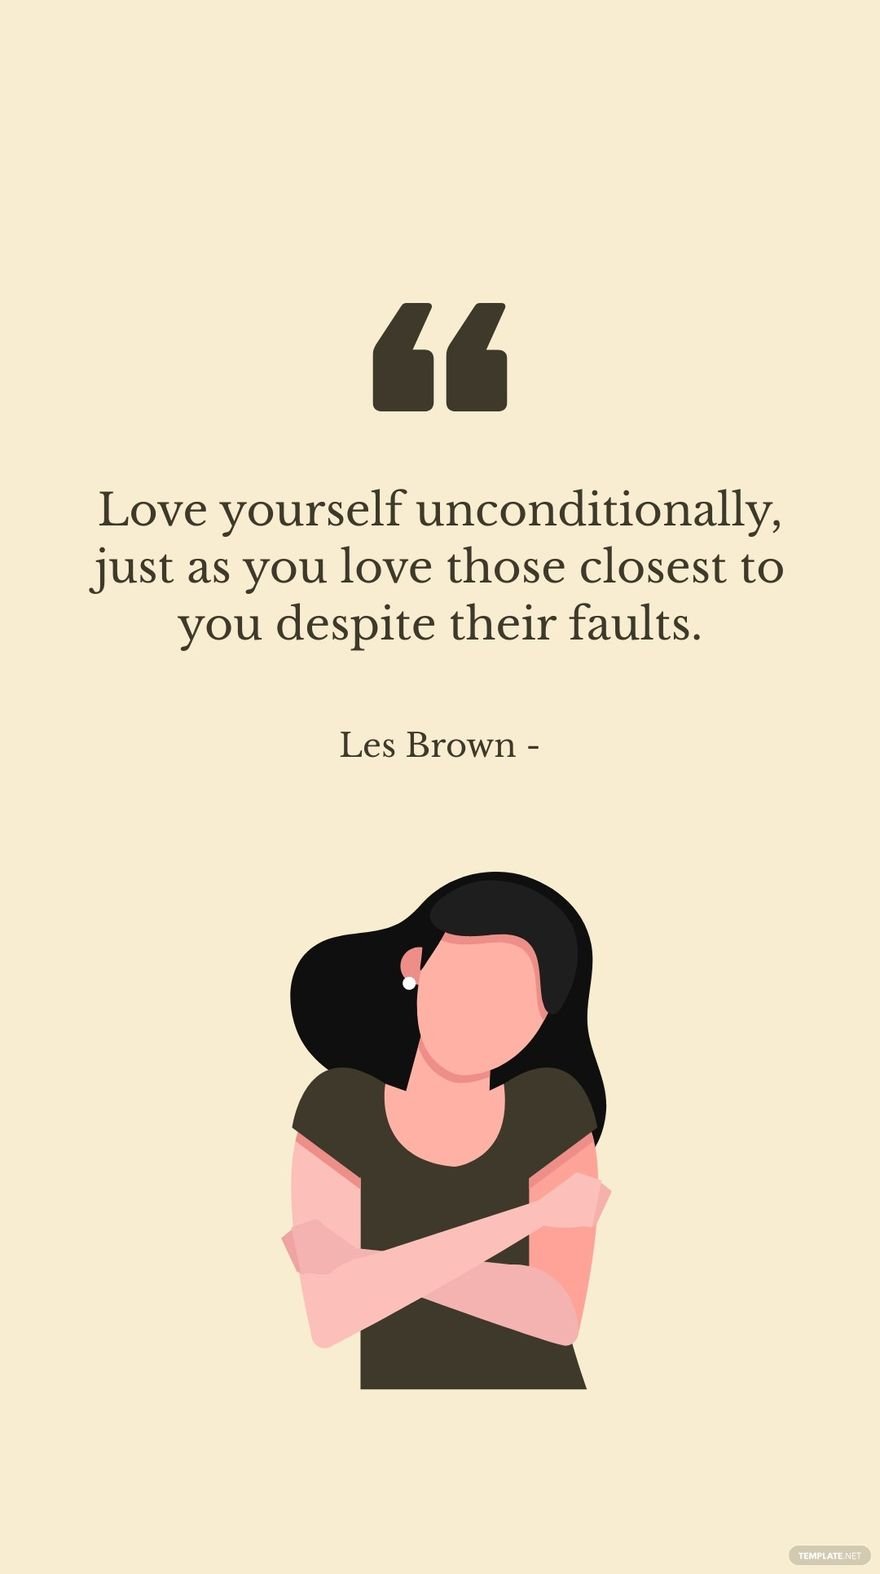 Les Brown - Love yourself unconditionally, just as you love those closest to you despite their faults. in JPG